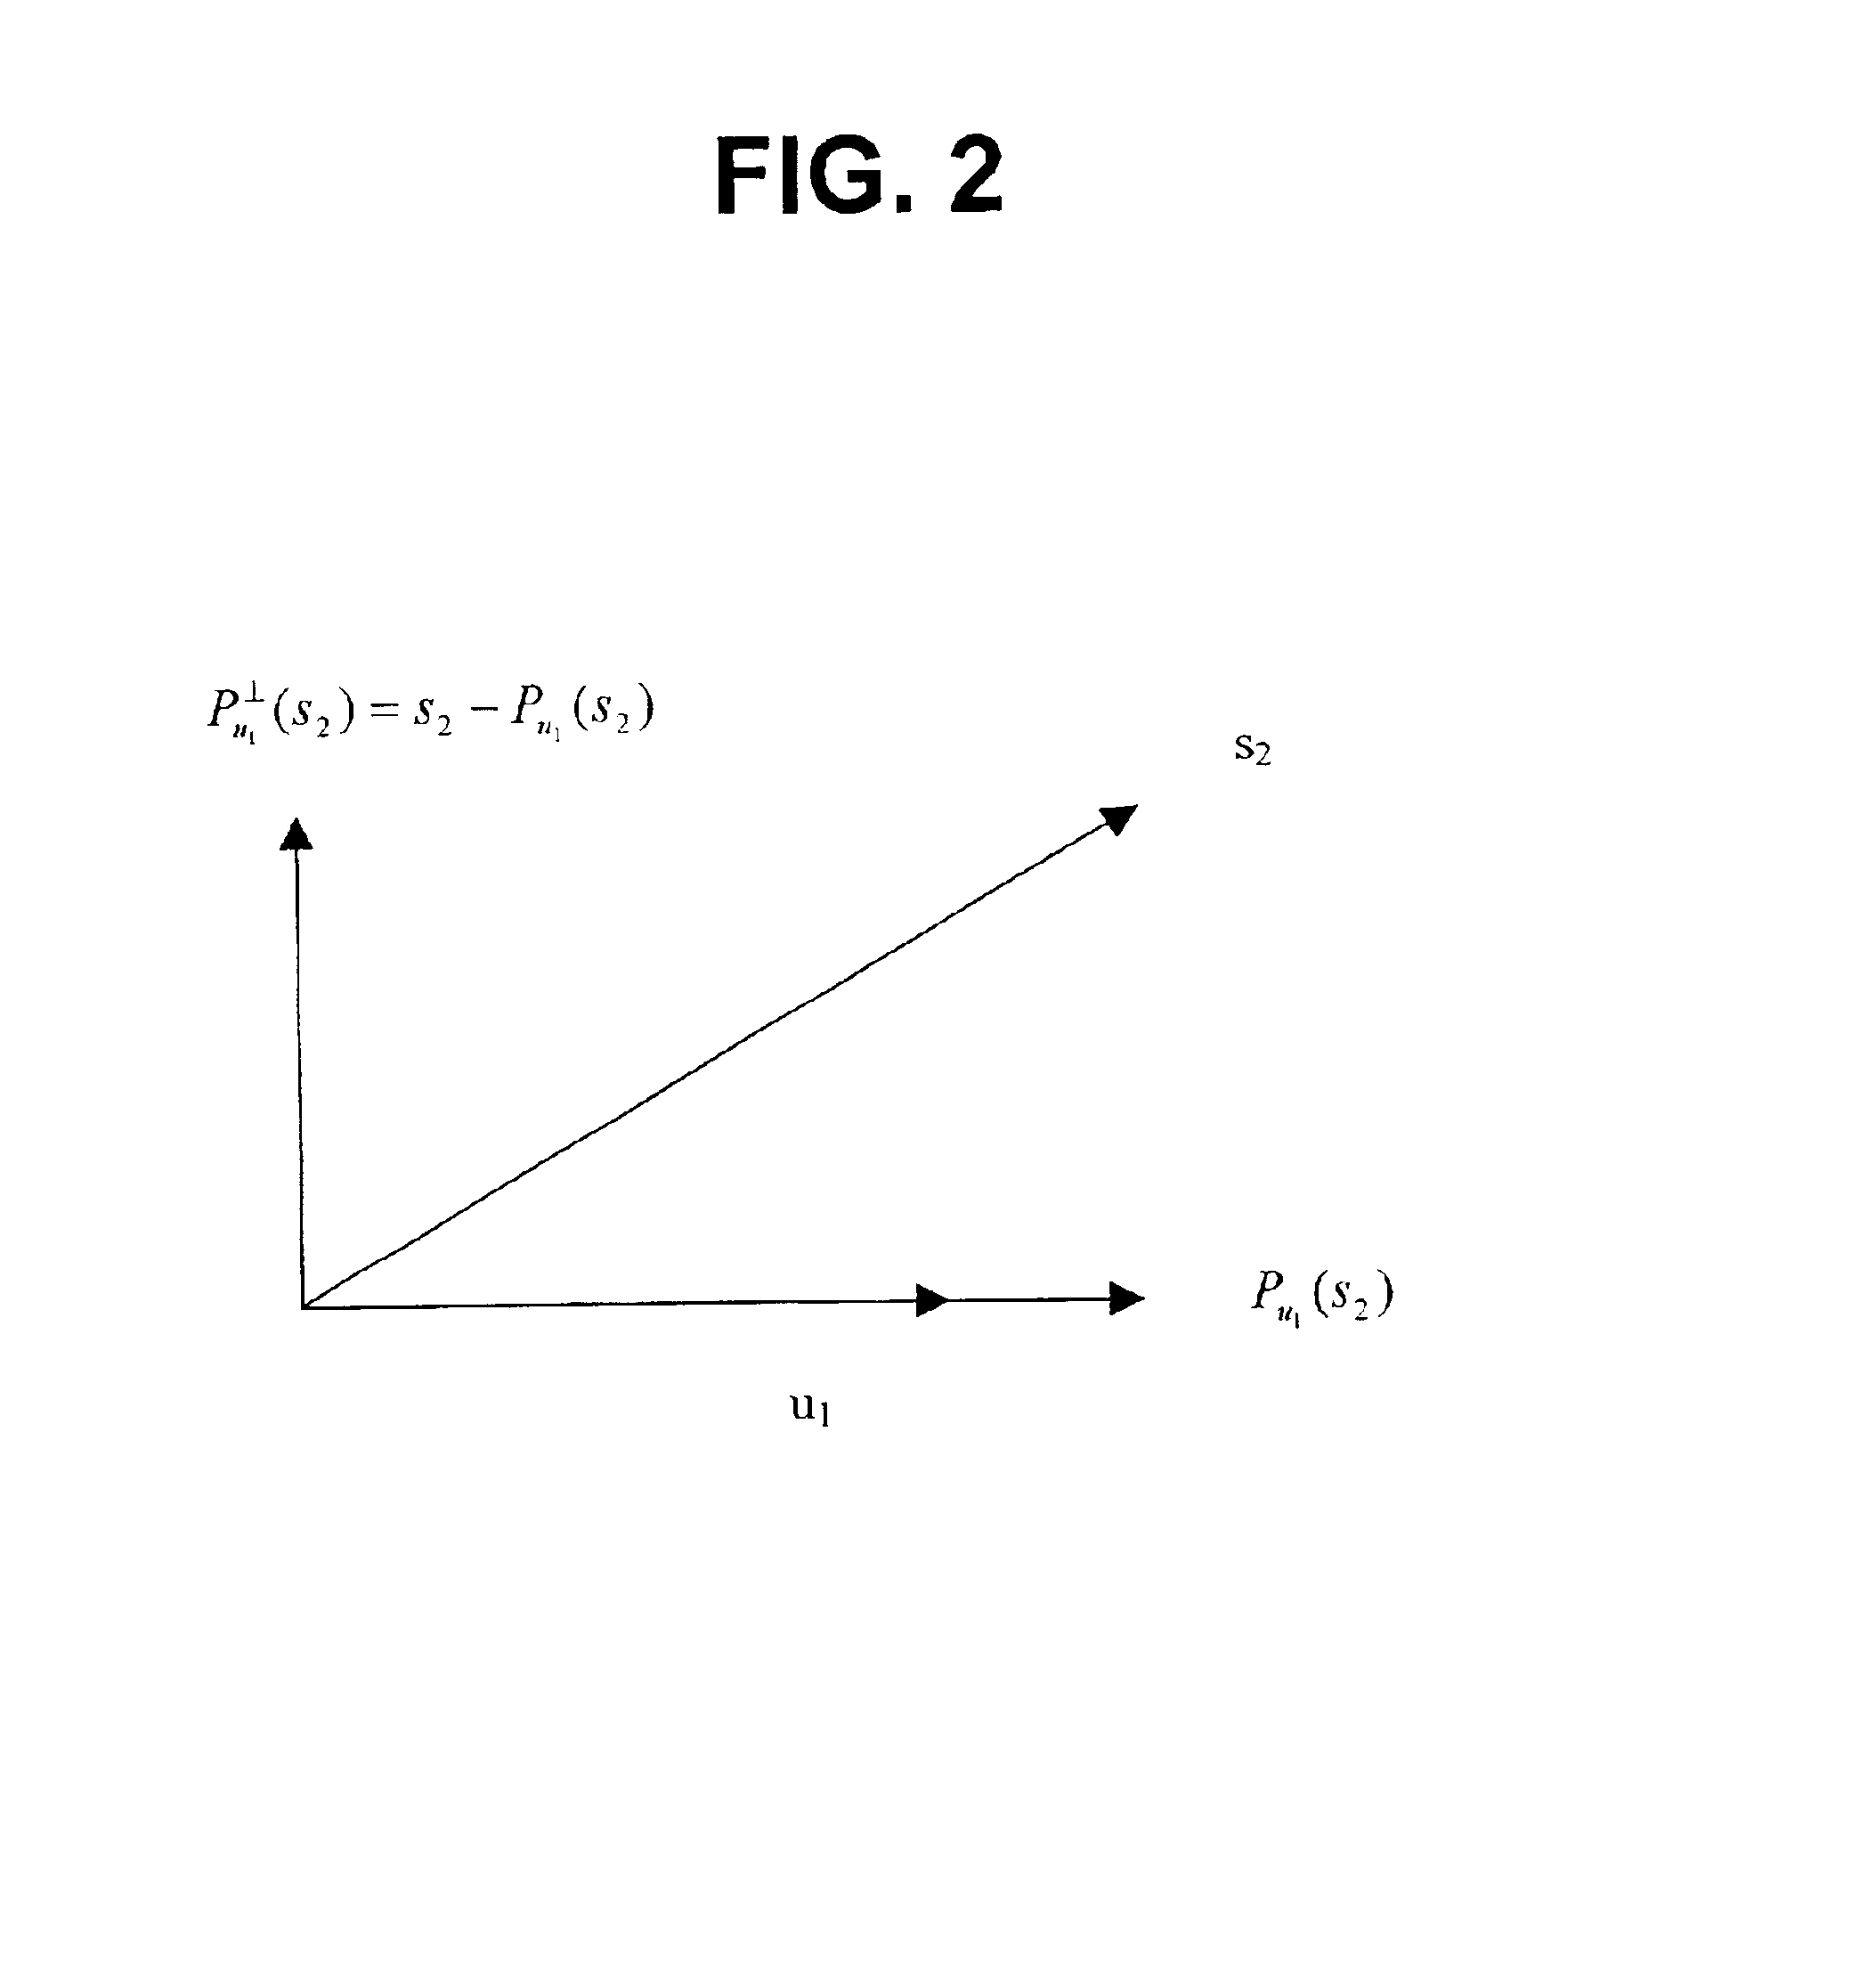 Method and apparatus for implementing projections in signal processing applications